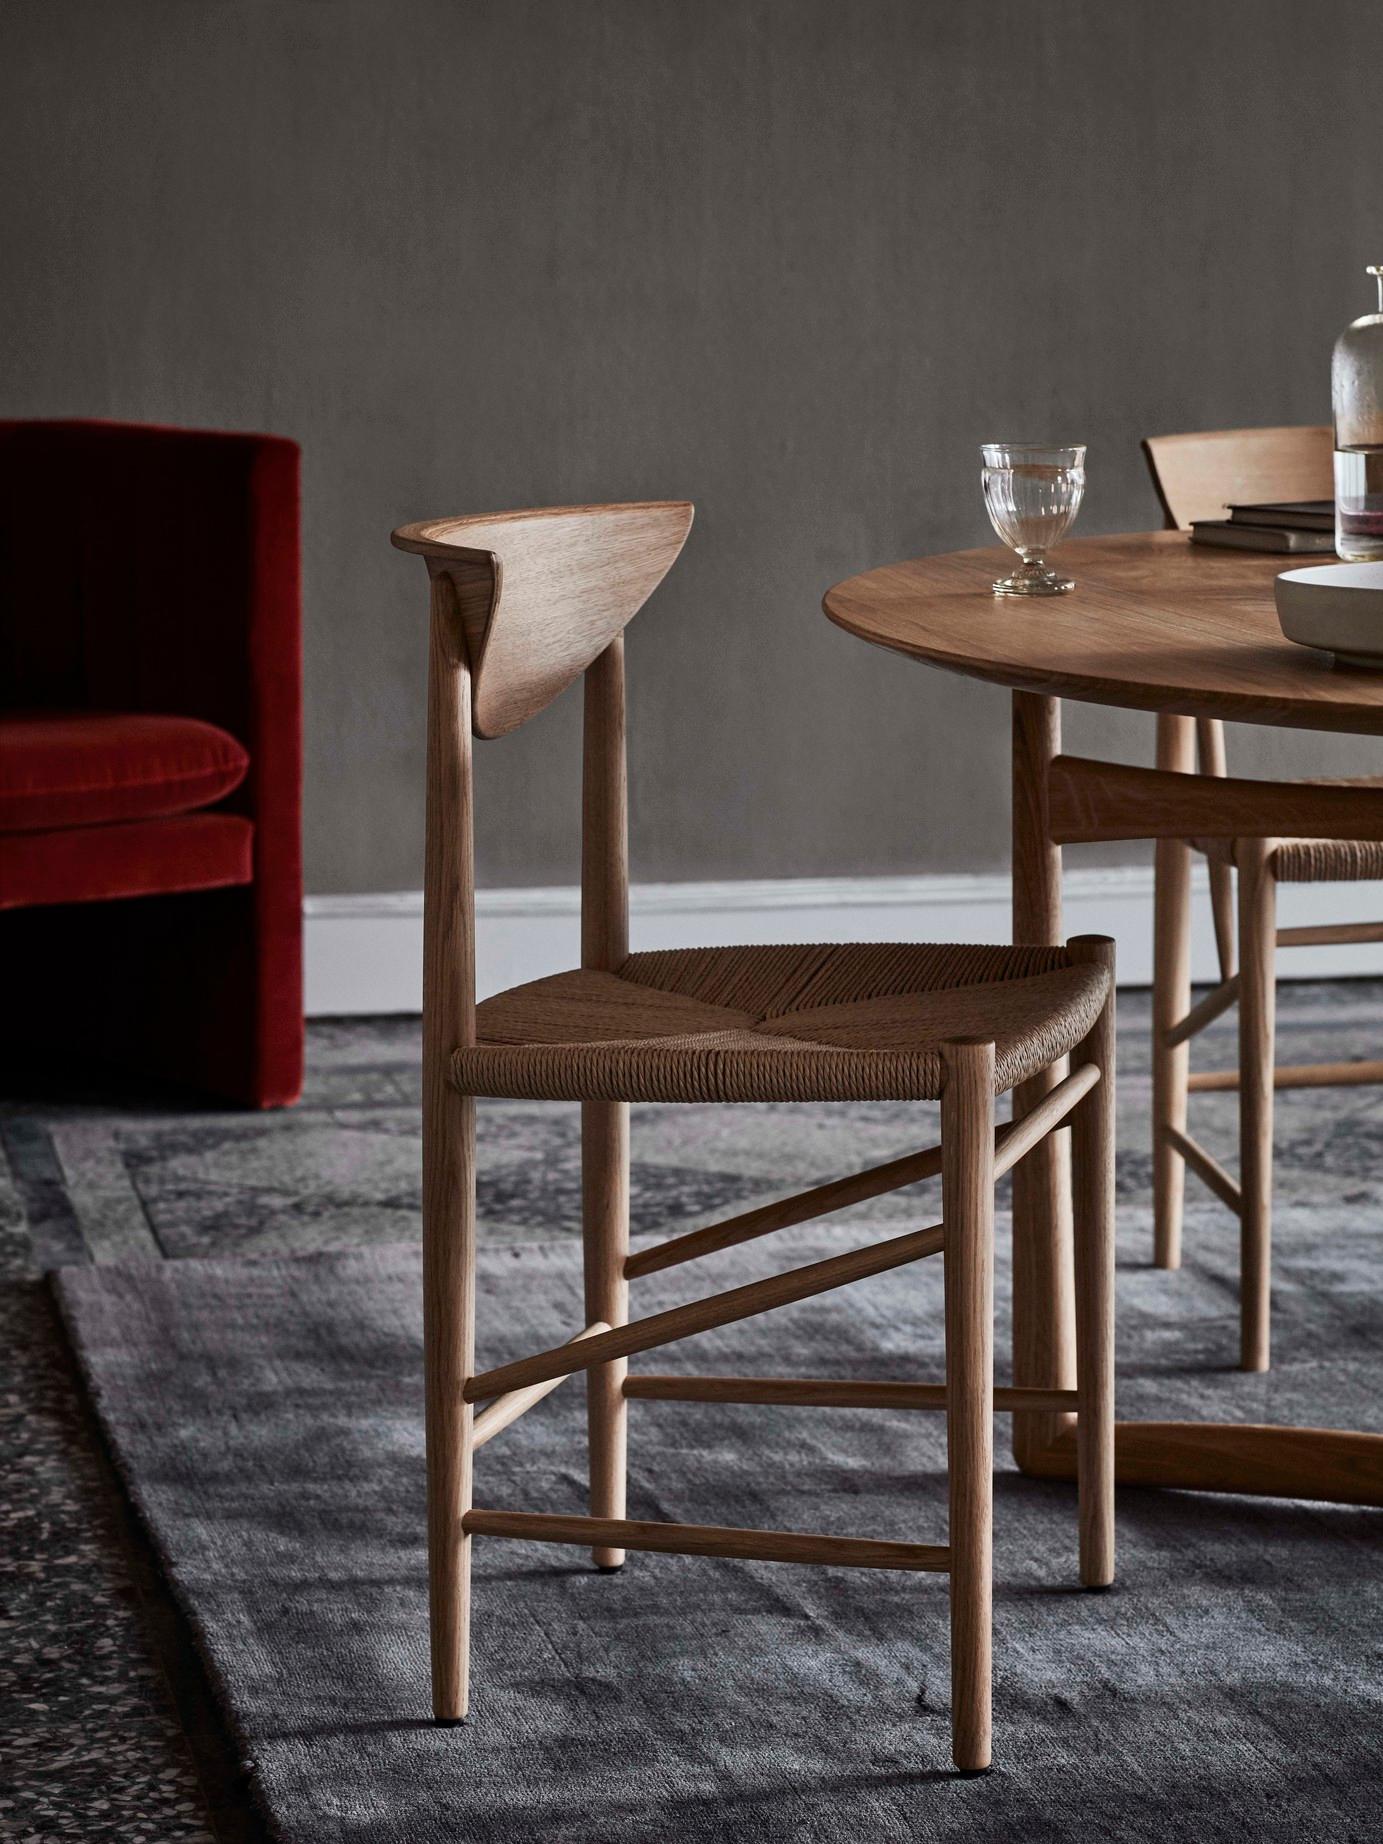 The 1956 Drawn chair by Hvidt & Mølgaard stands out as a definitive piece of Danish design.
Relying upon traditional craftsmanship techniques and built out of organic materials, it brings a sense of wholesome honesty to any space.
The chair is